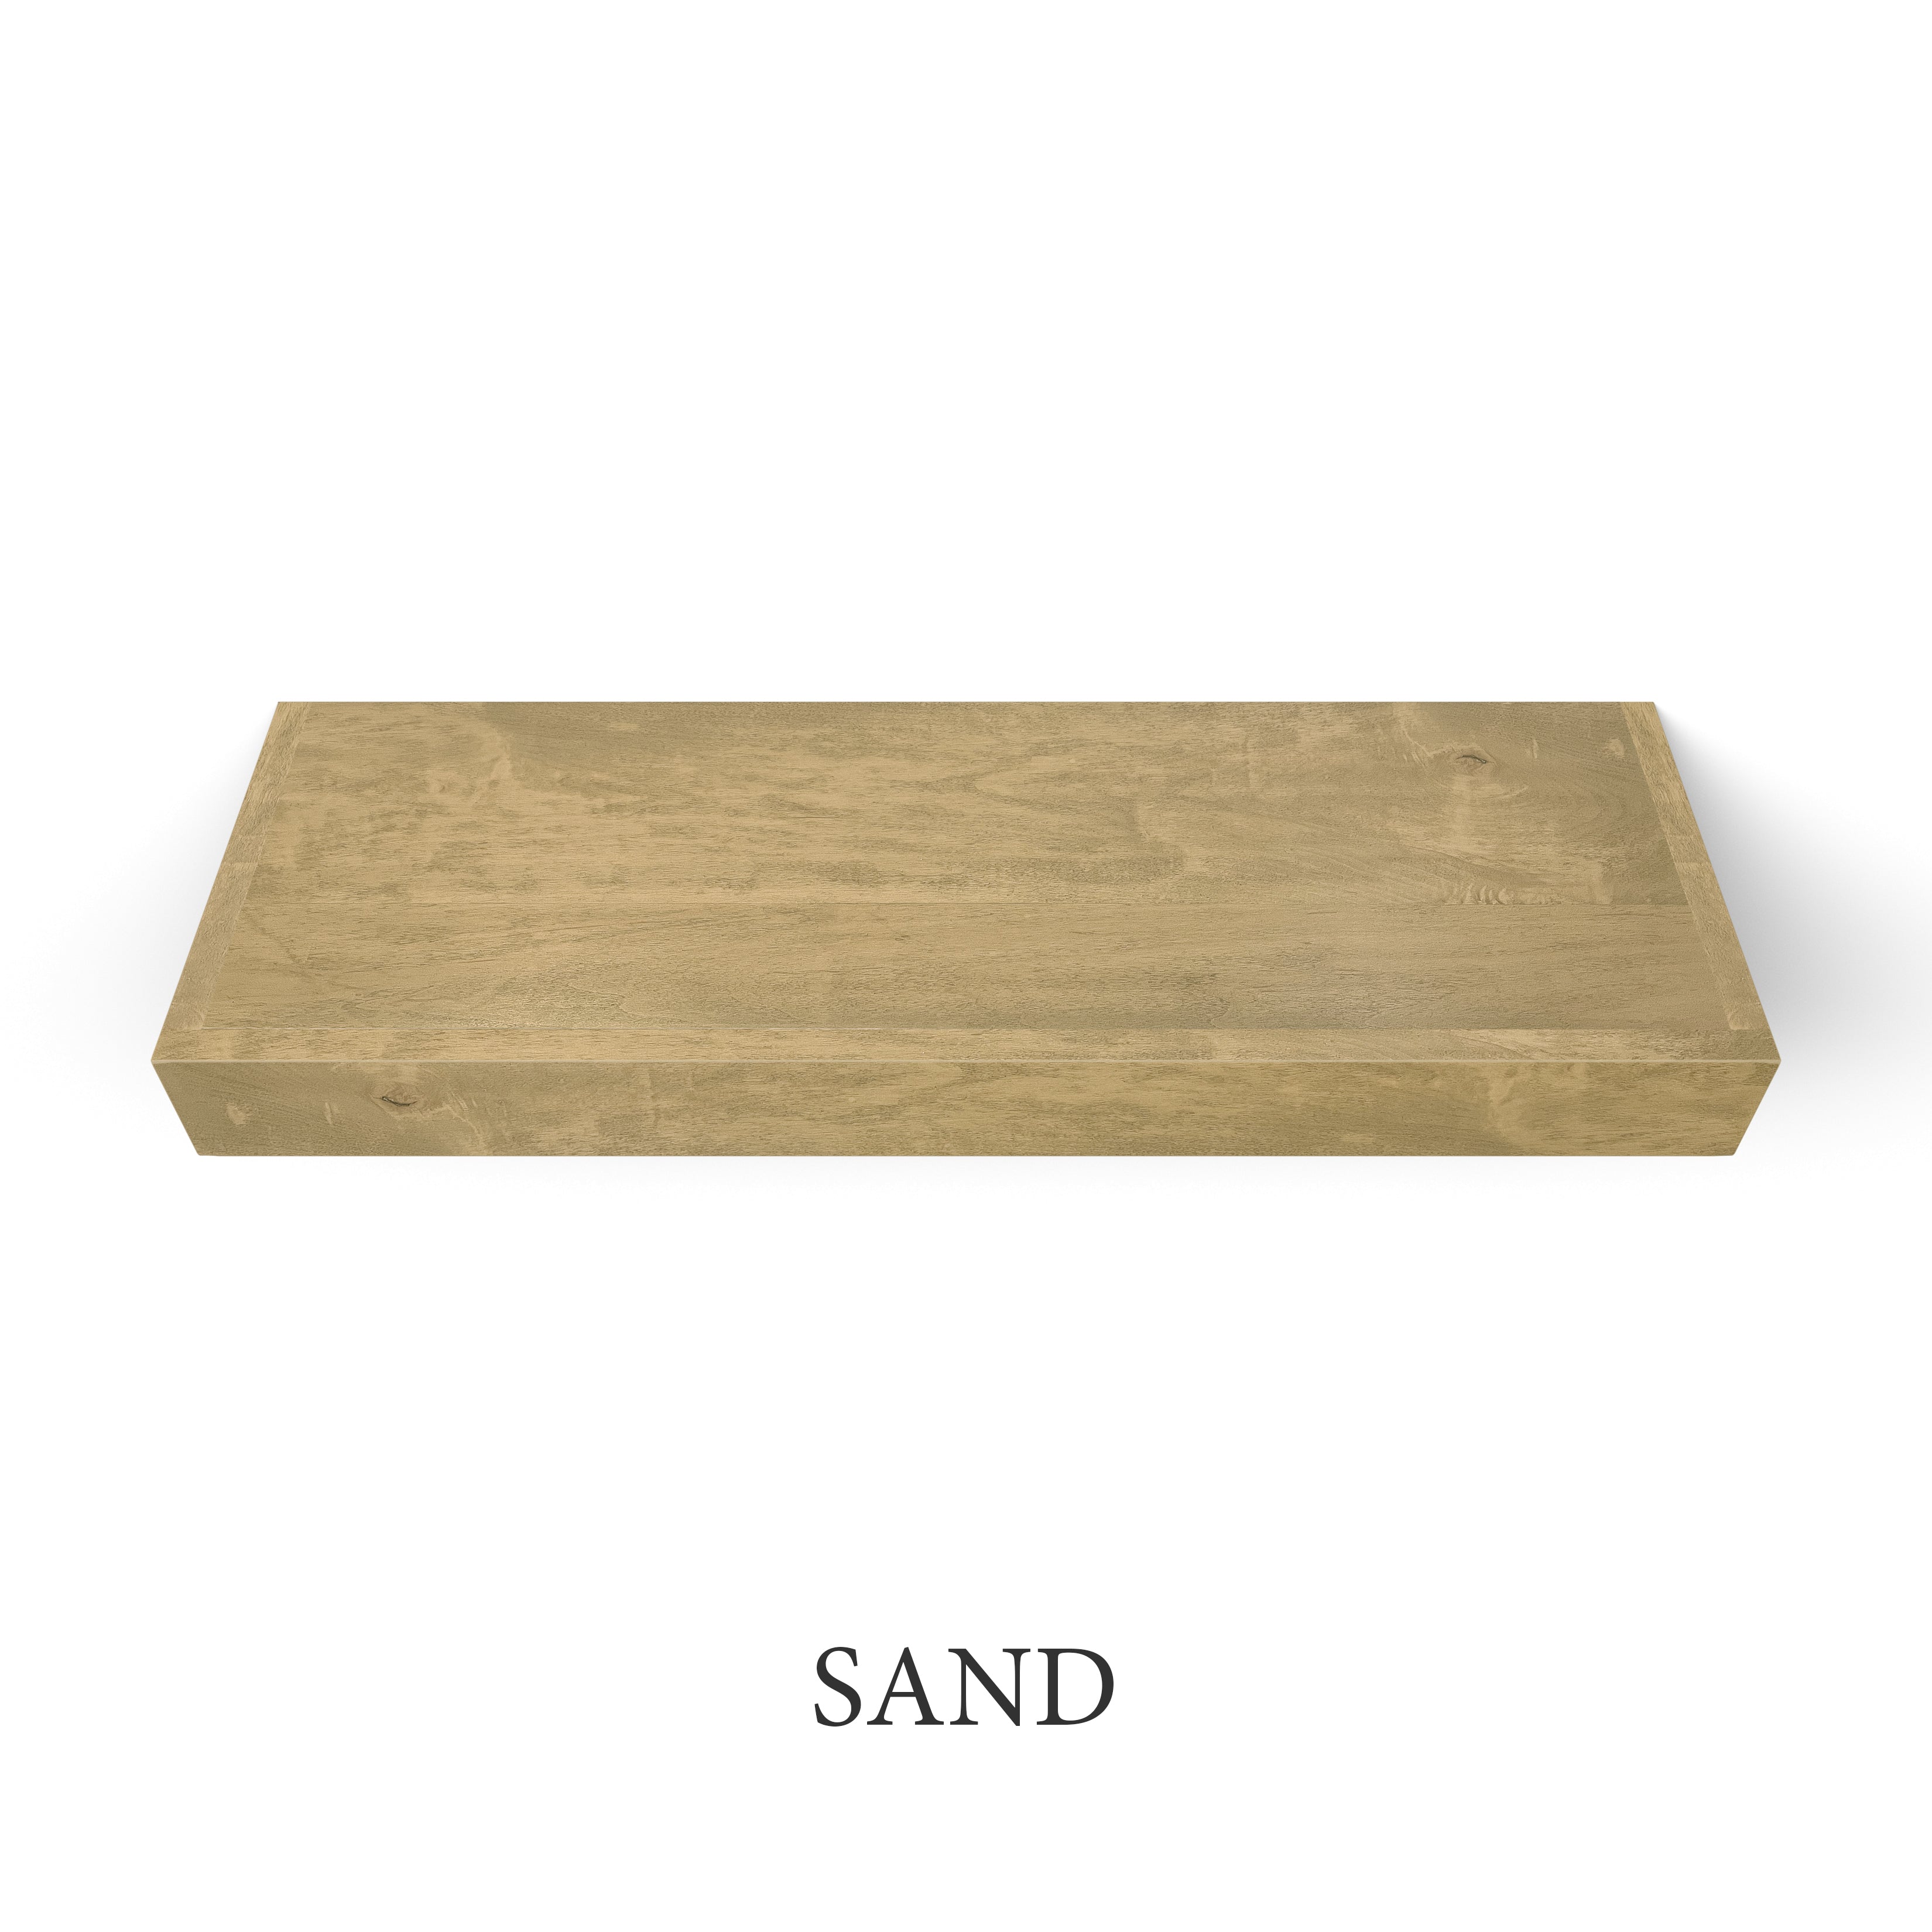 sand Maple 3 Inch Thick Floating Shelf